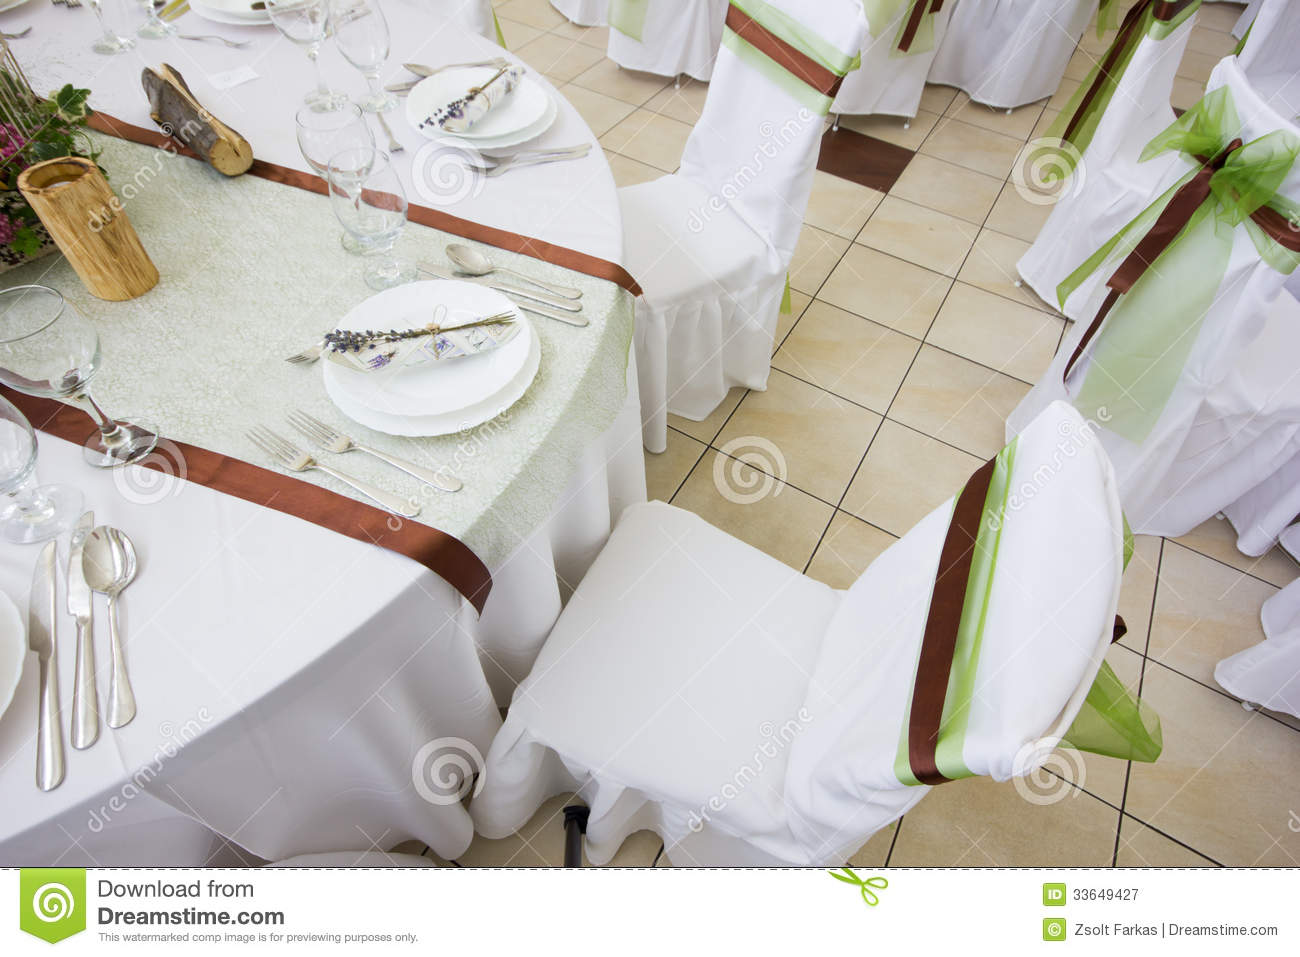 Table Set For Wedding Or Another Catered Event Dinner Royalty Free    